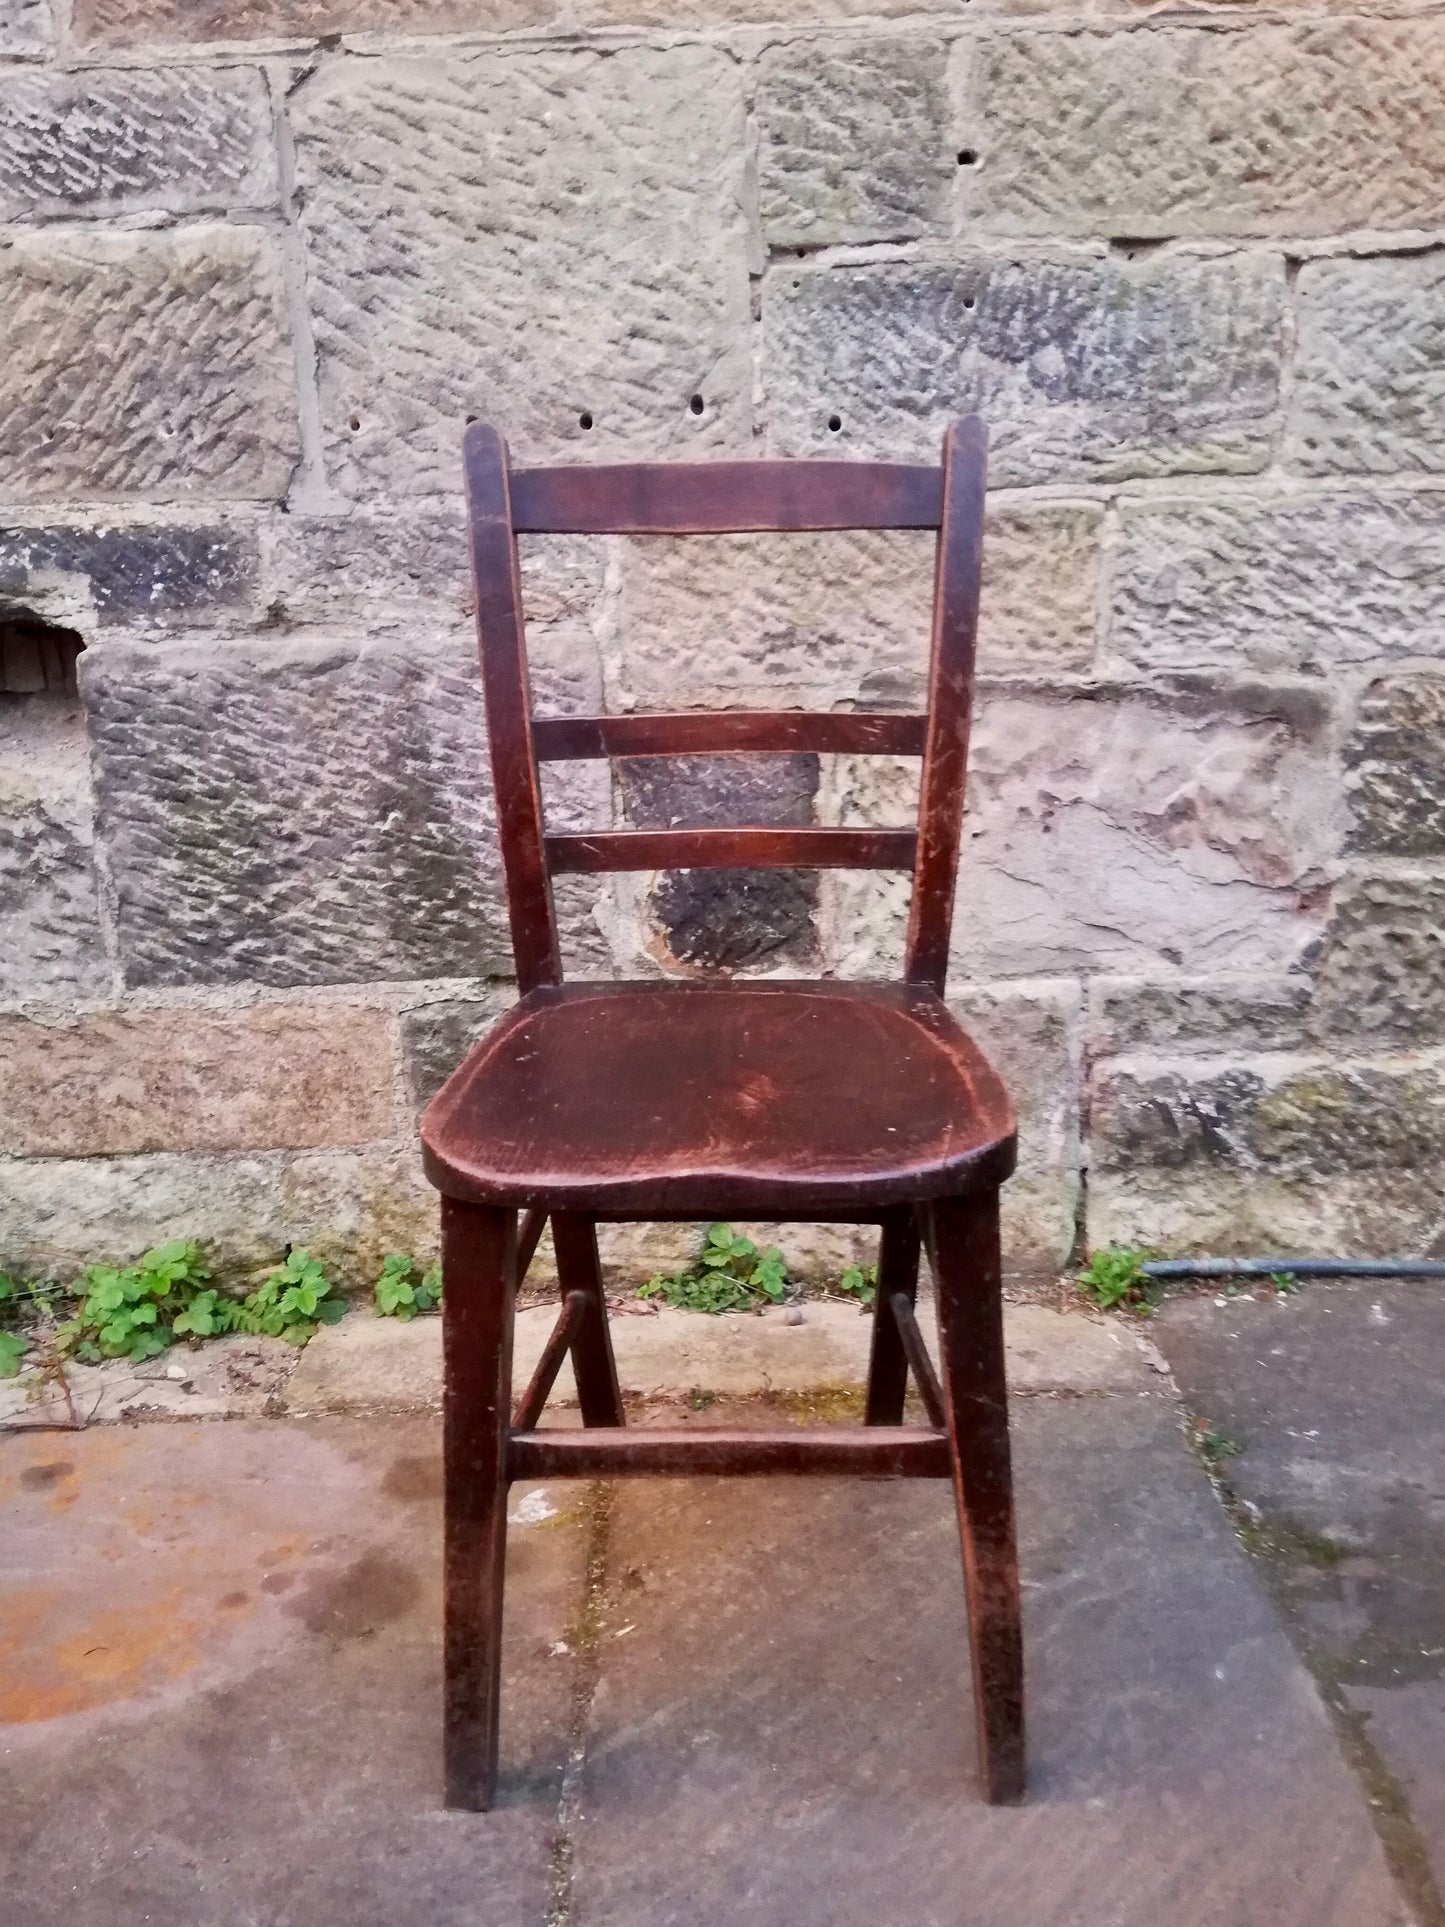 Larger size vintage wooden school chairs